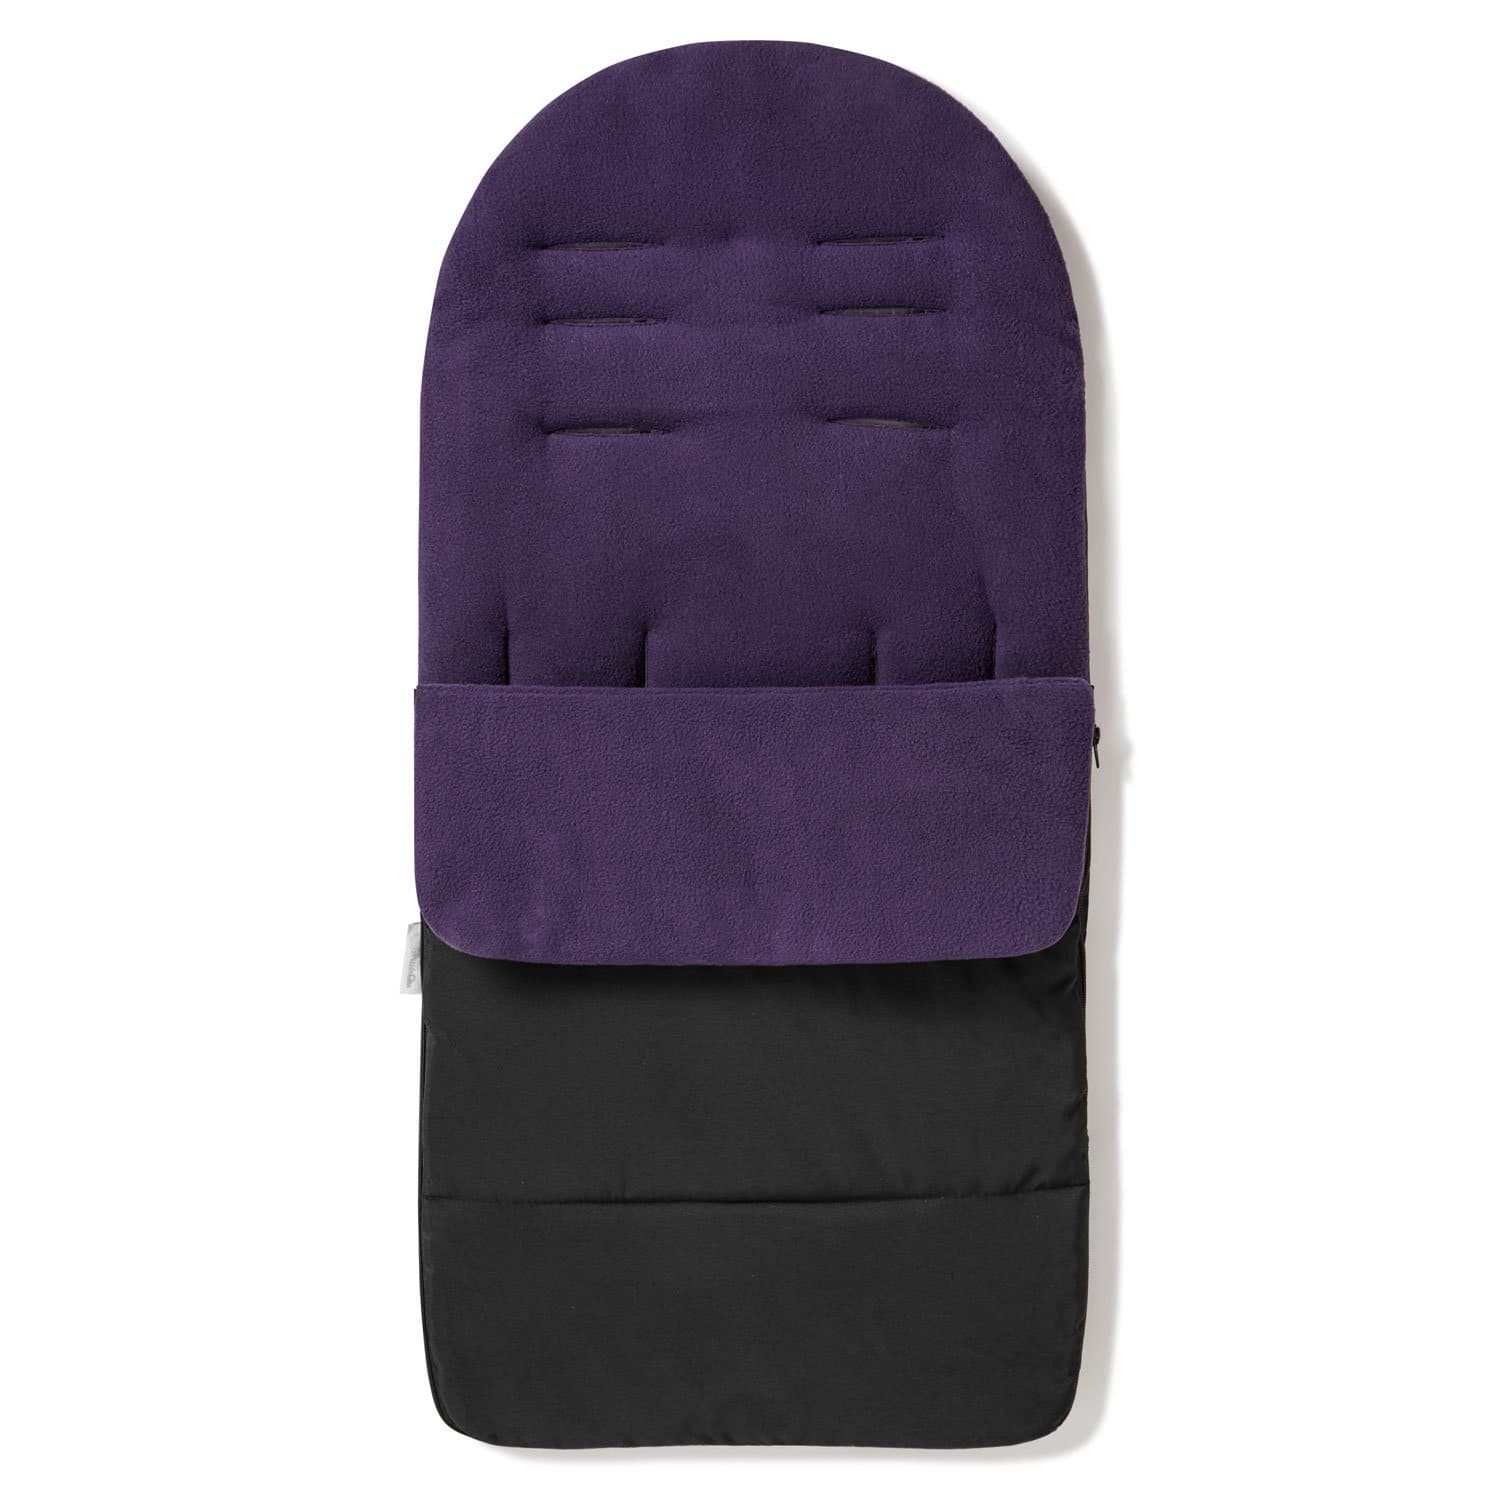 Premium Footmuff / Cosy Toes Compatible with Out 'n' About - Plum Purple / Fits All Models | For Your Little One